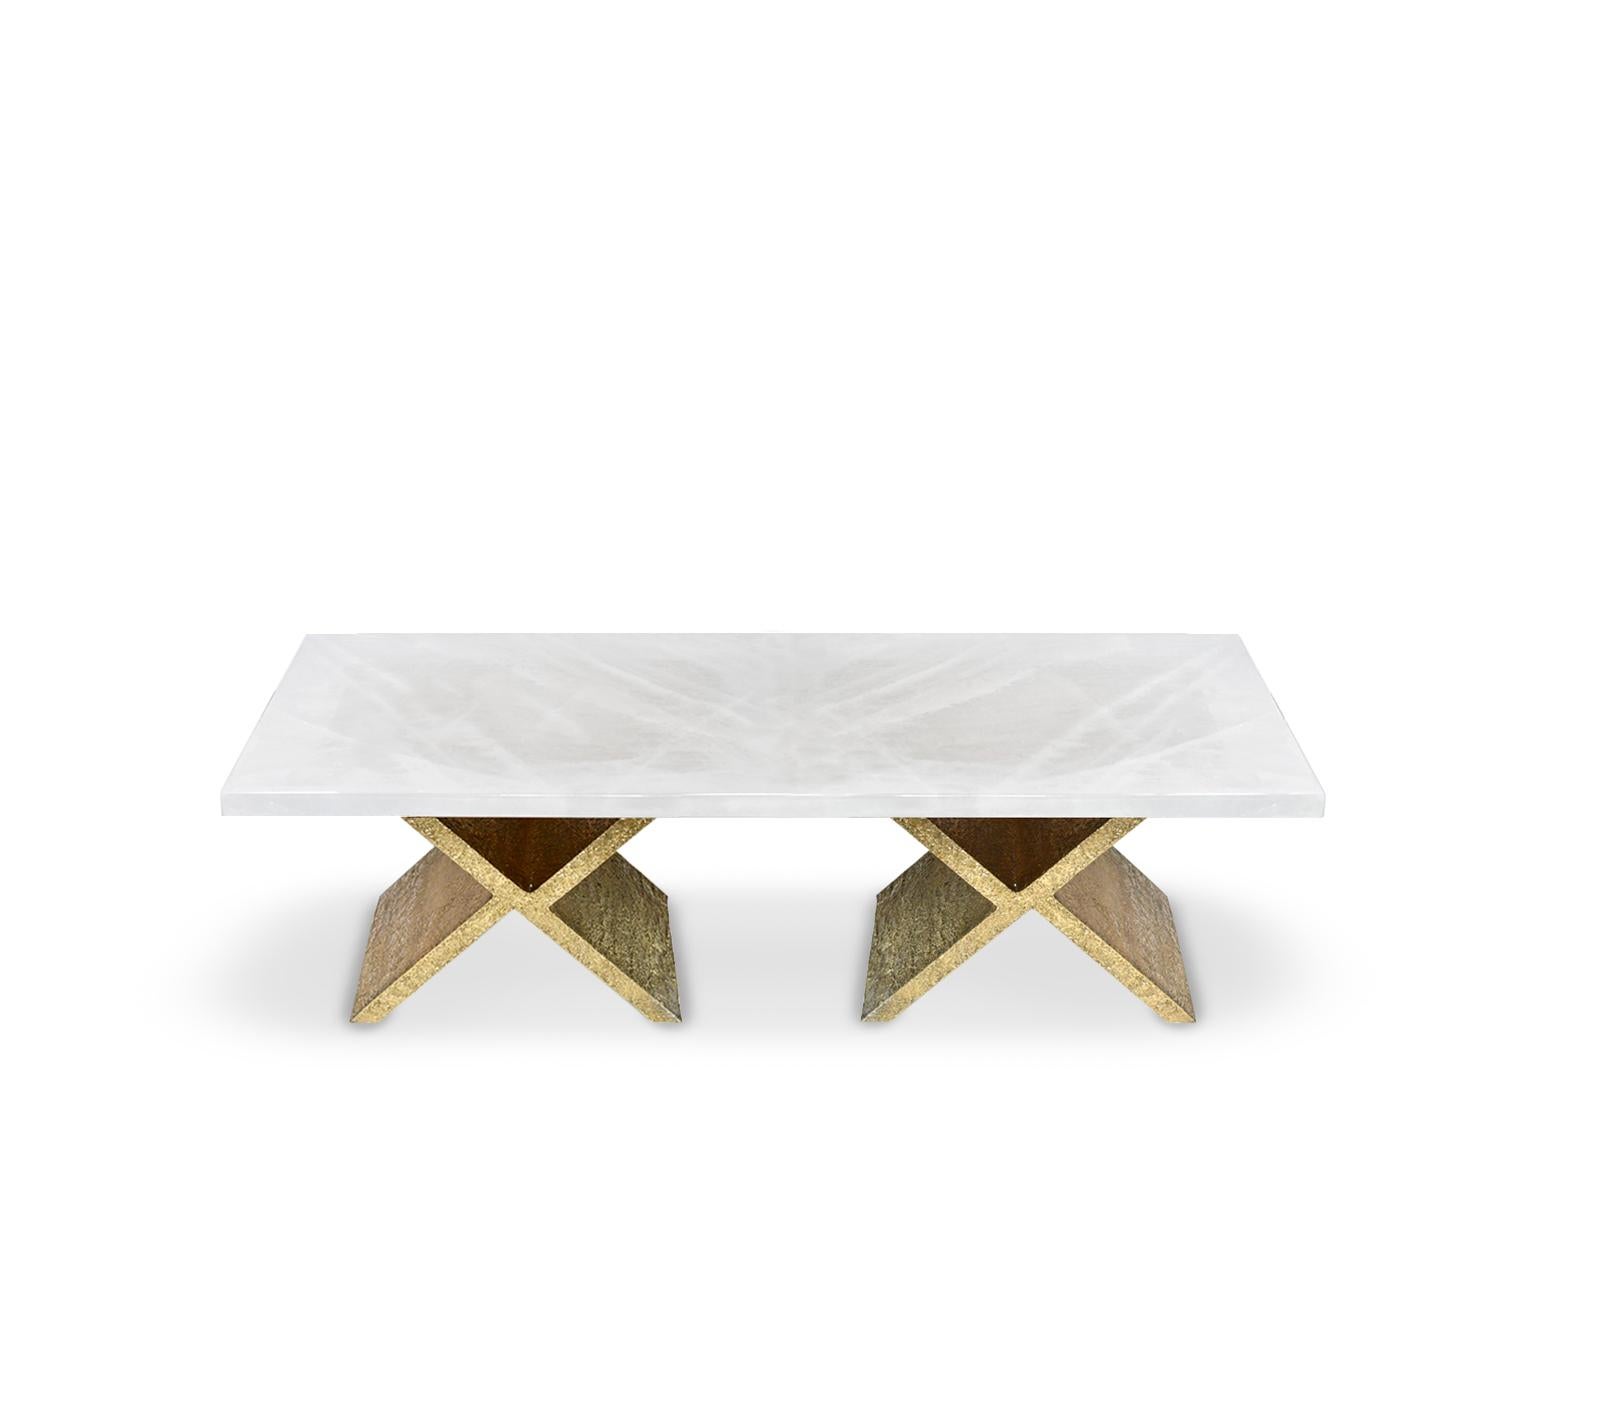 Double X Coffee Table by Phoenix In Excellent Condition For Sale In New York, NY